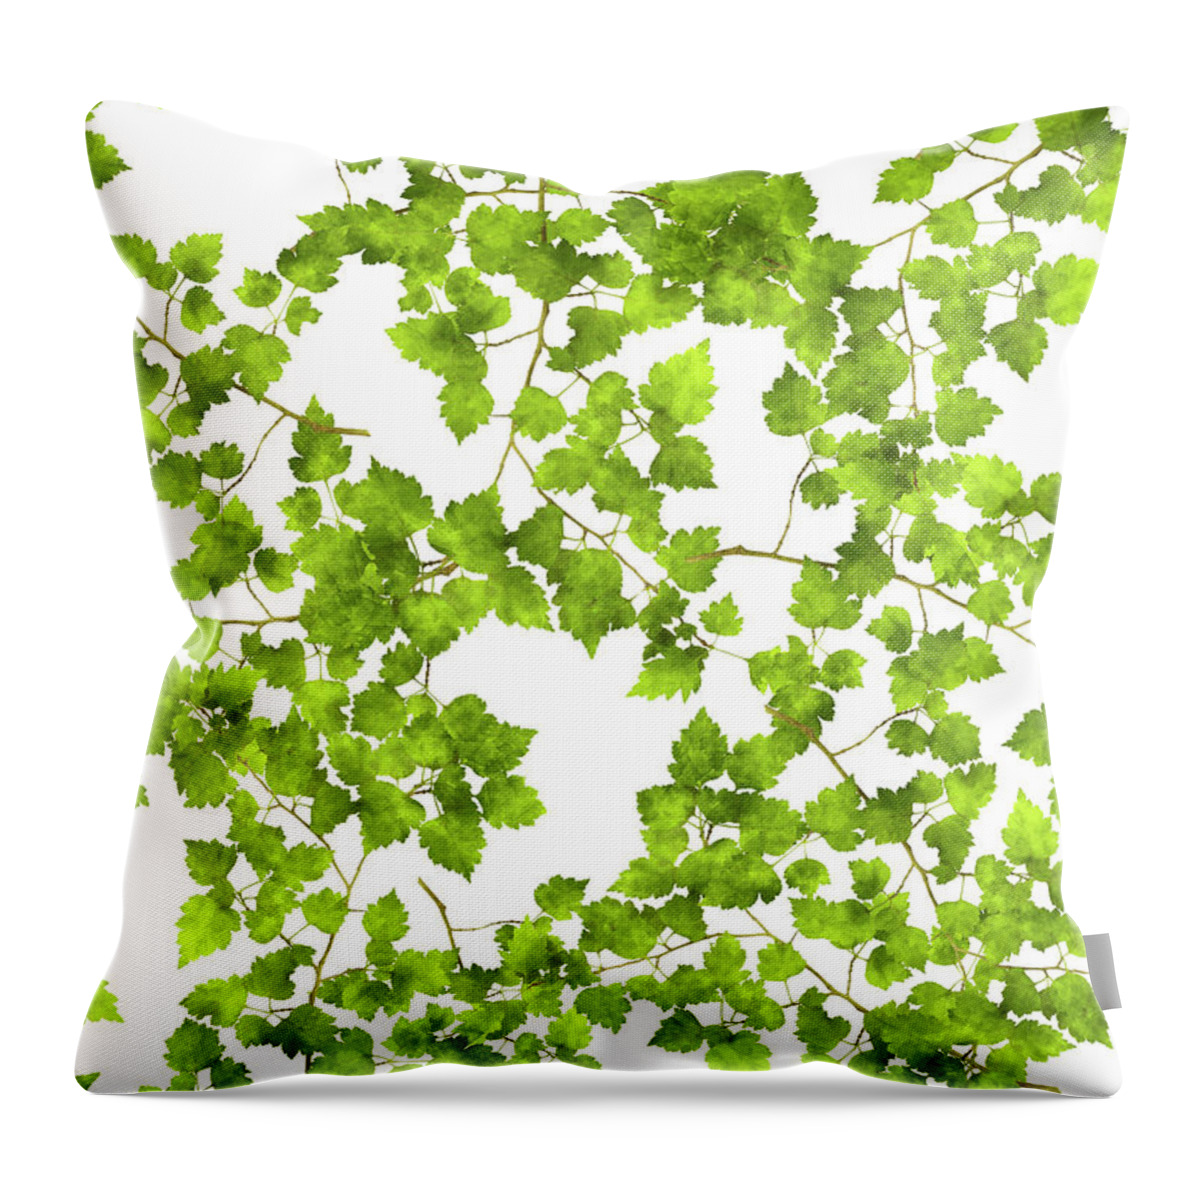 Leaves Throw Pillow featuring the mixed media Hawthorn Pressed Leaf Art by Christina Rollo